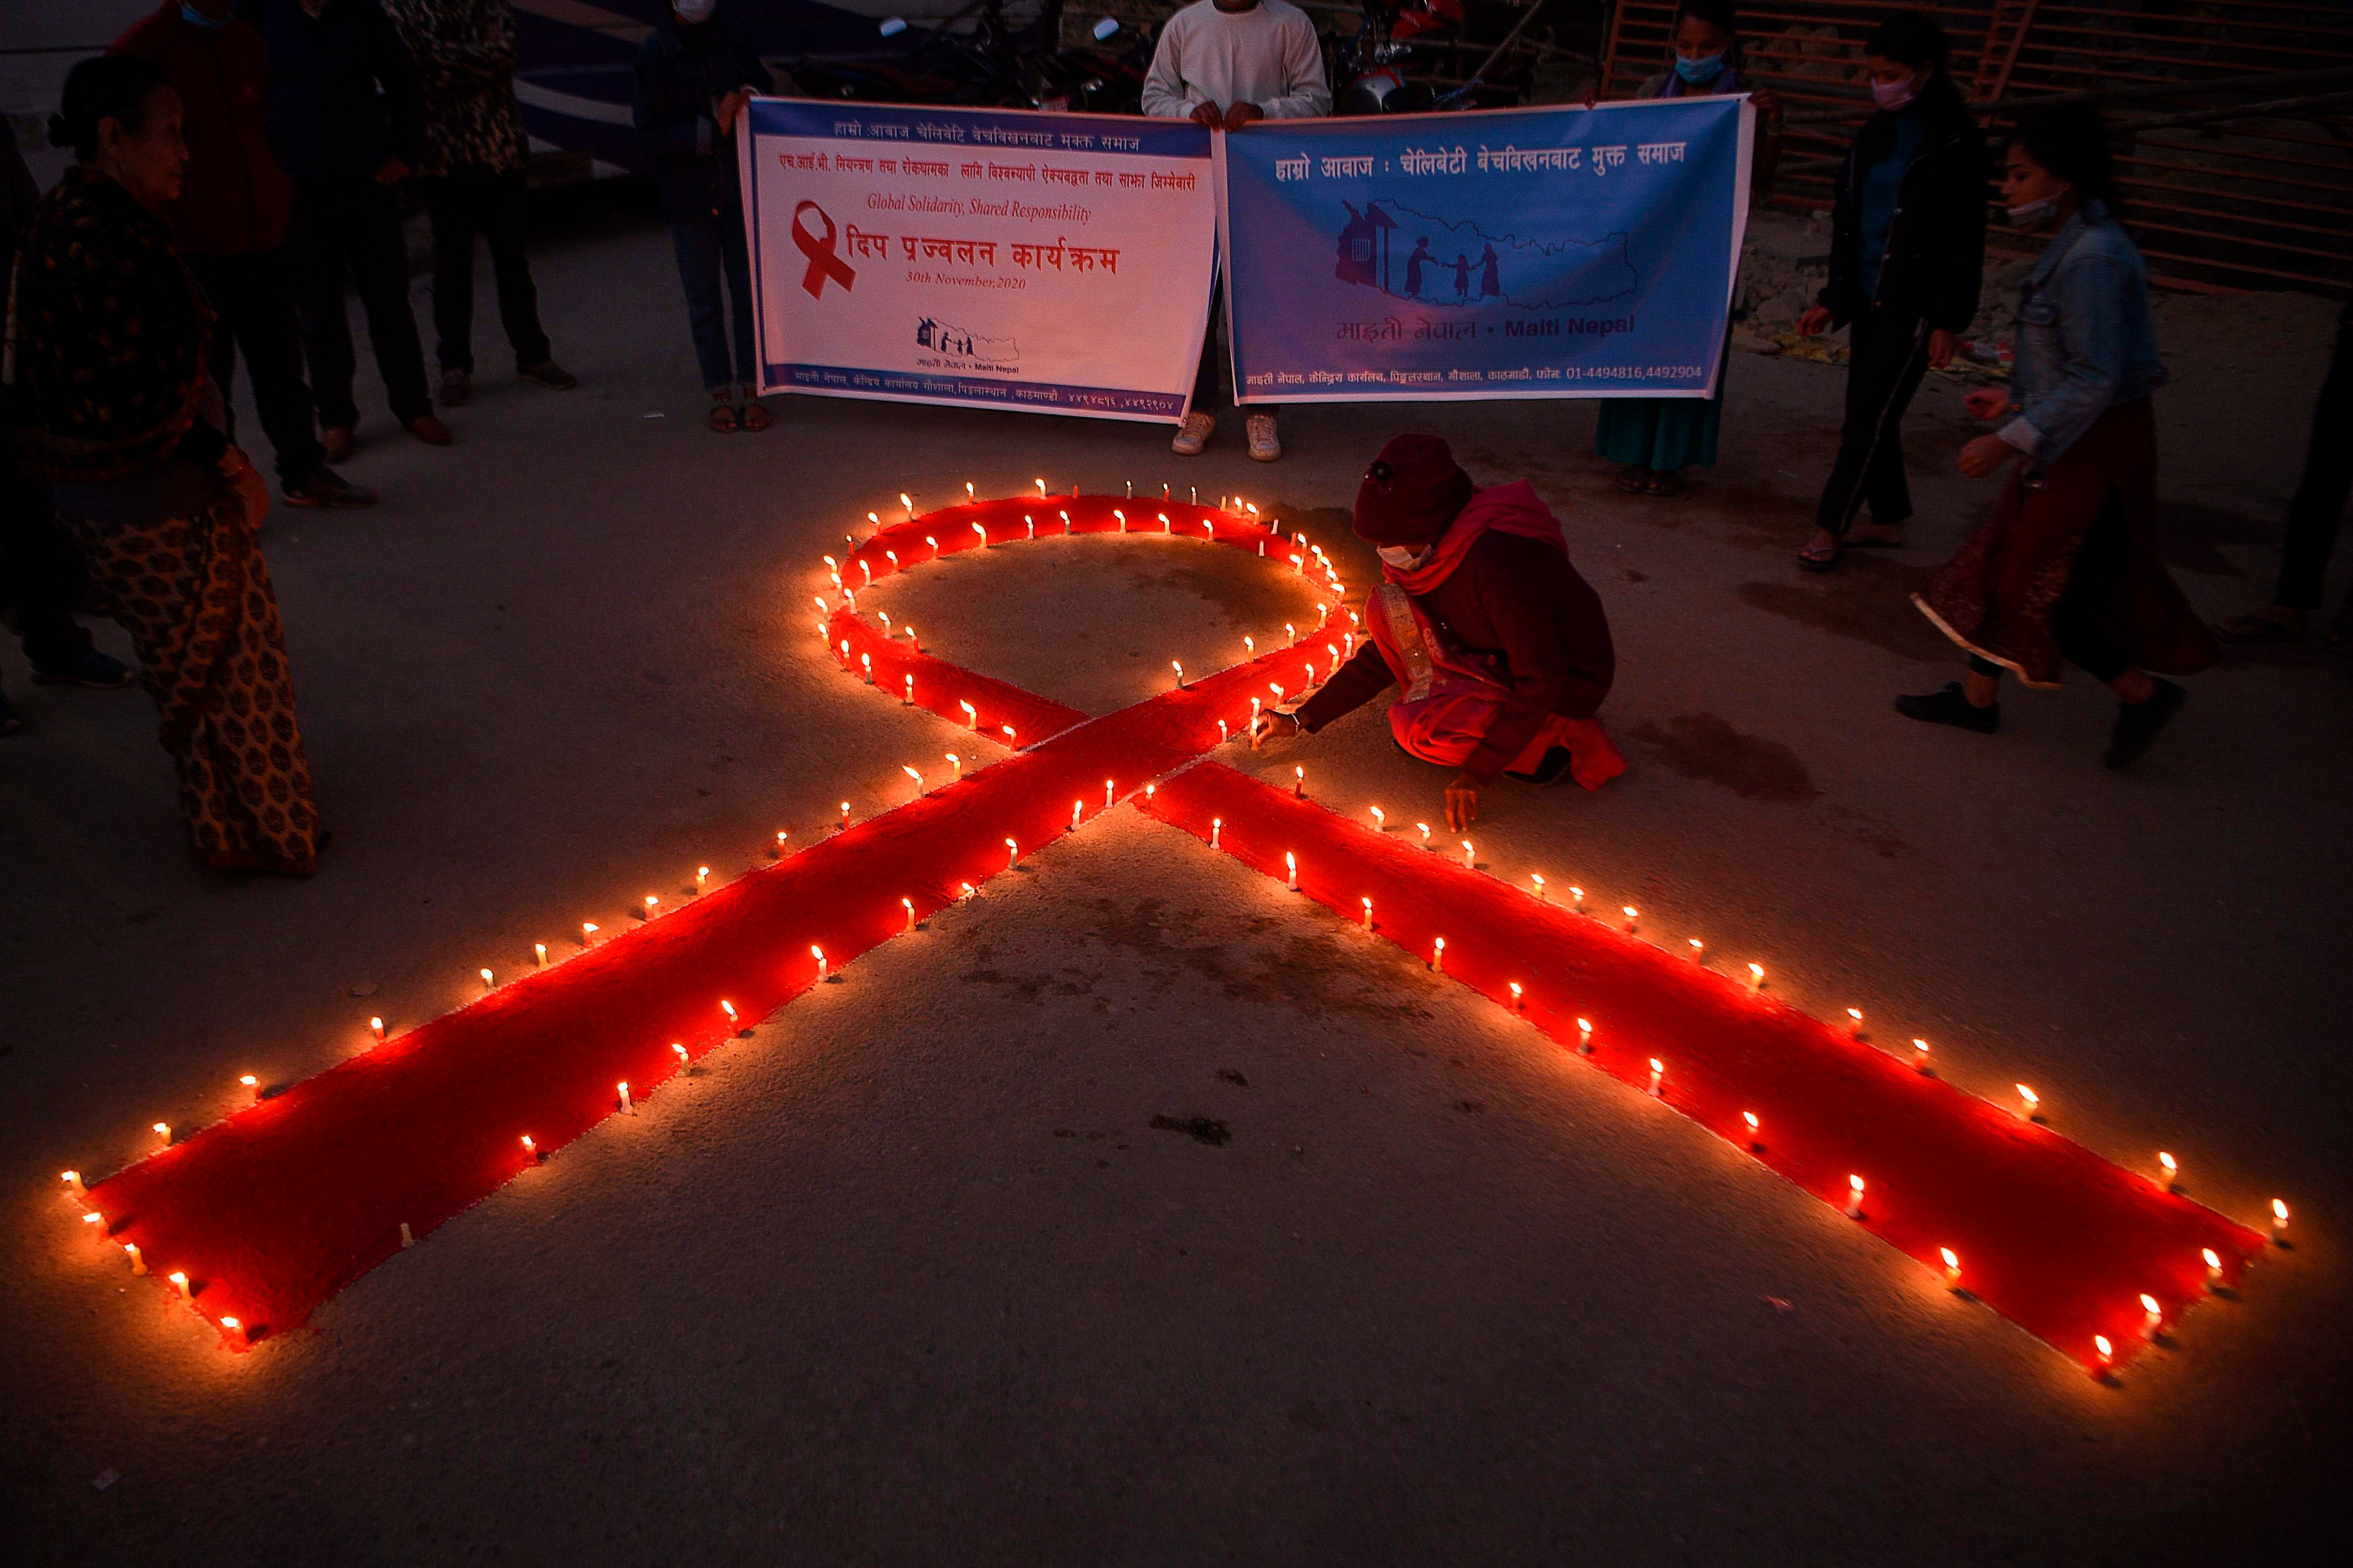 File: A volunteer lights candles forming the shape of a red ribbon during an awareness event on the eve of the World AIDS Day